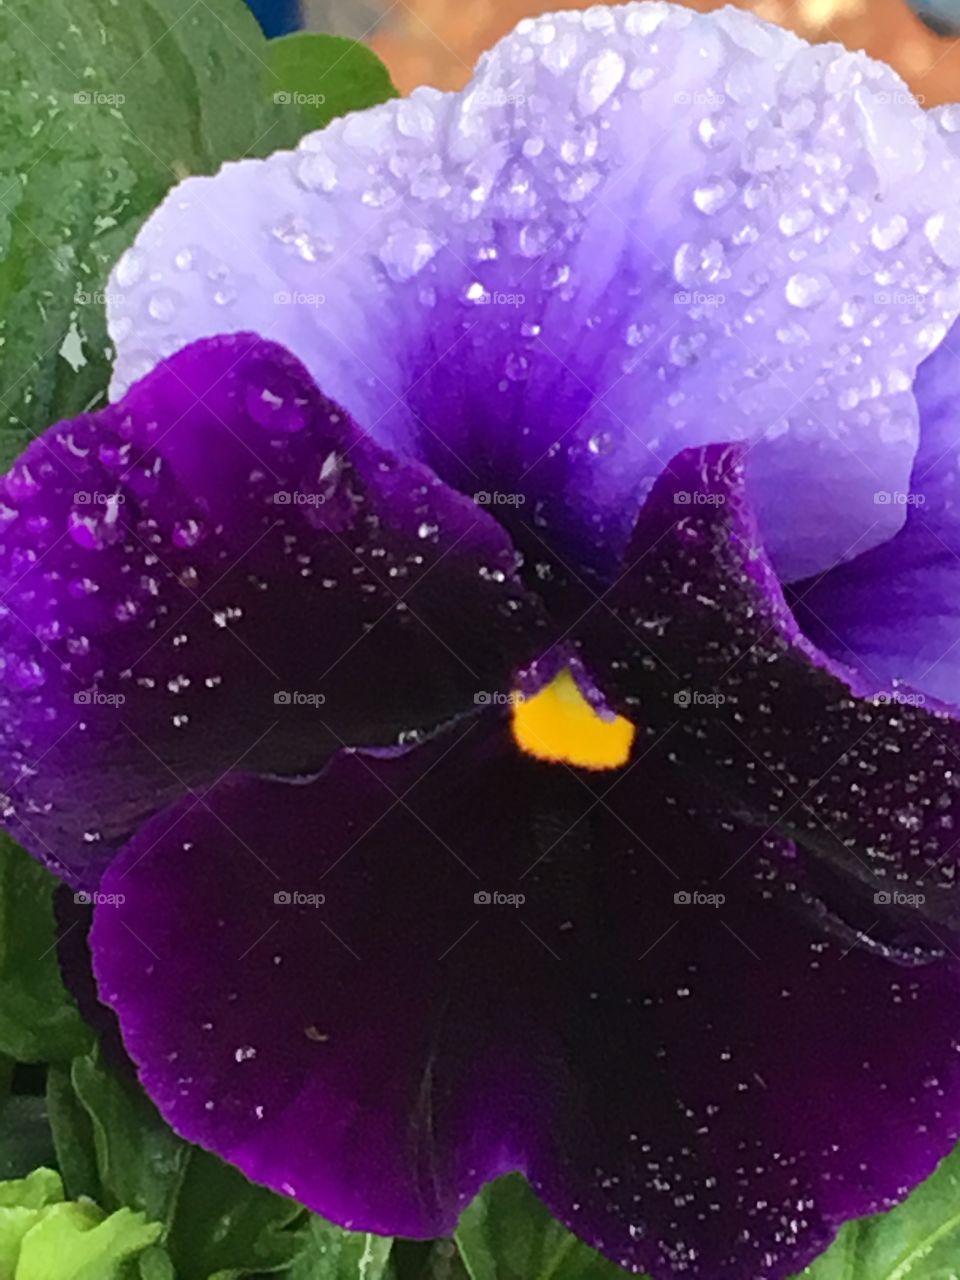 Royal purple pansy kissed with rain 